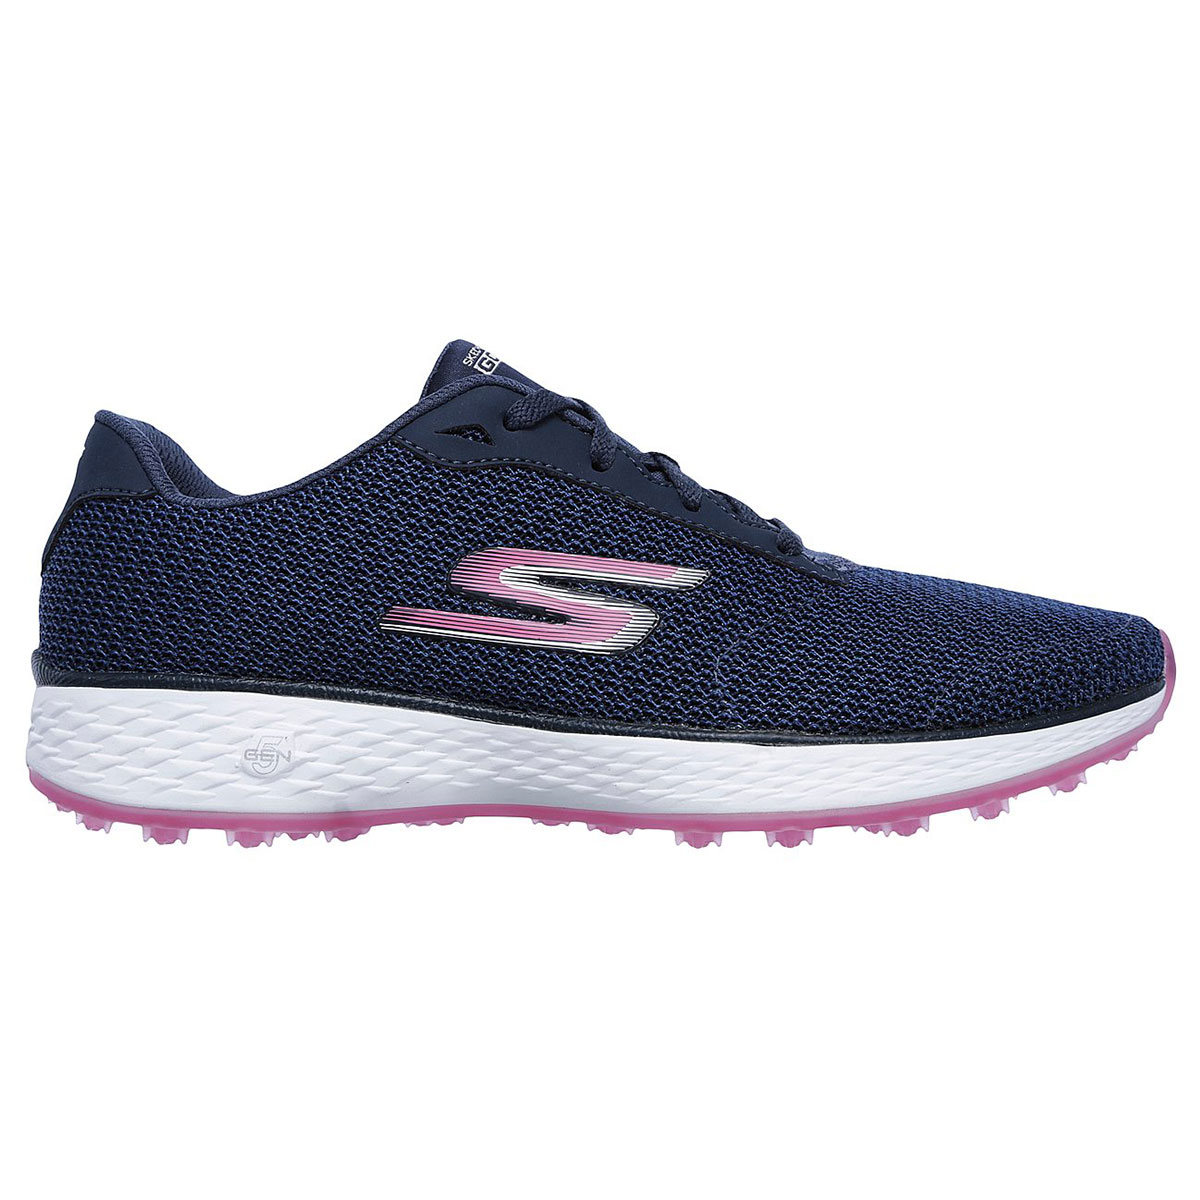 Skechers Go Golf Eagle Range Shoes from 